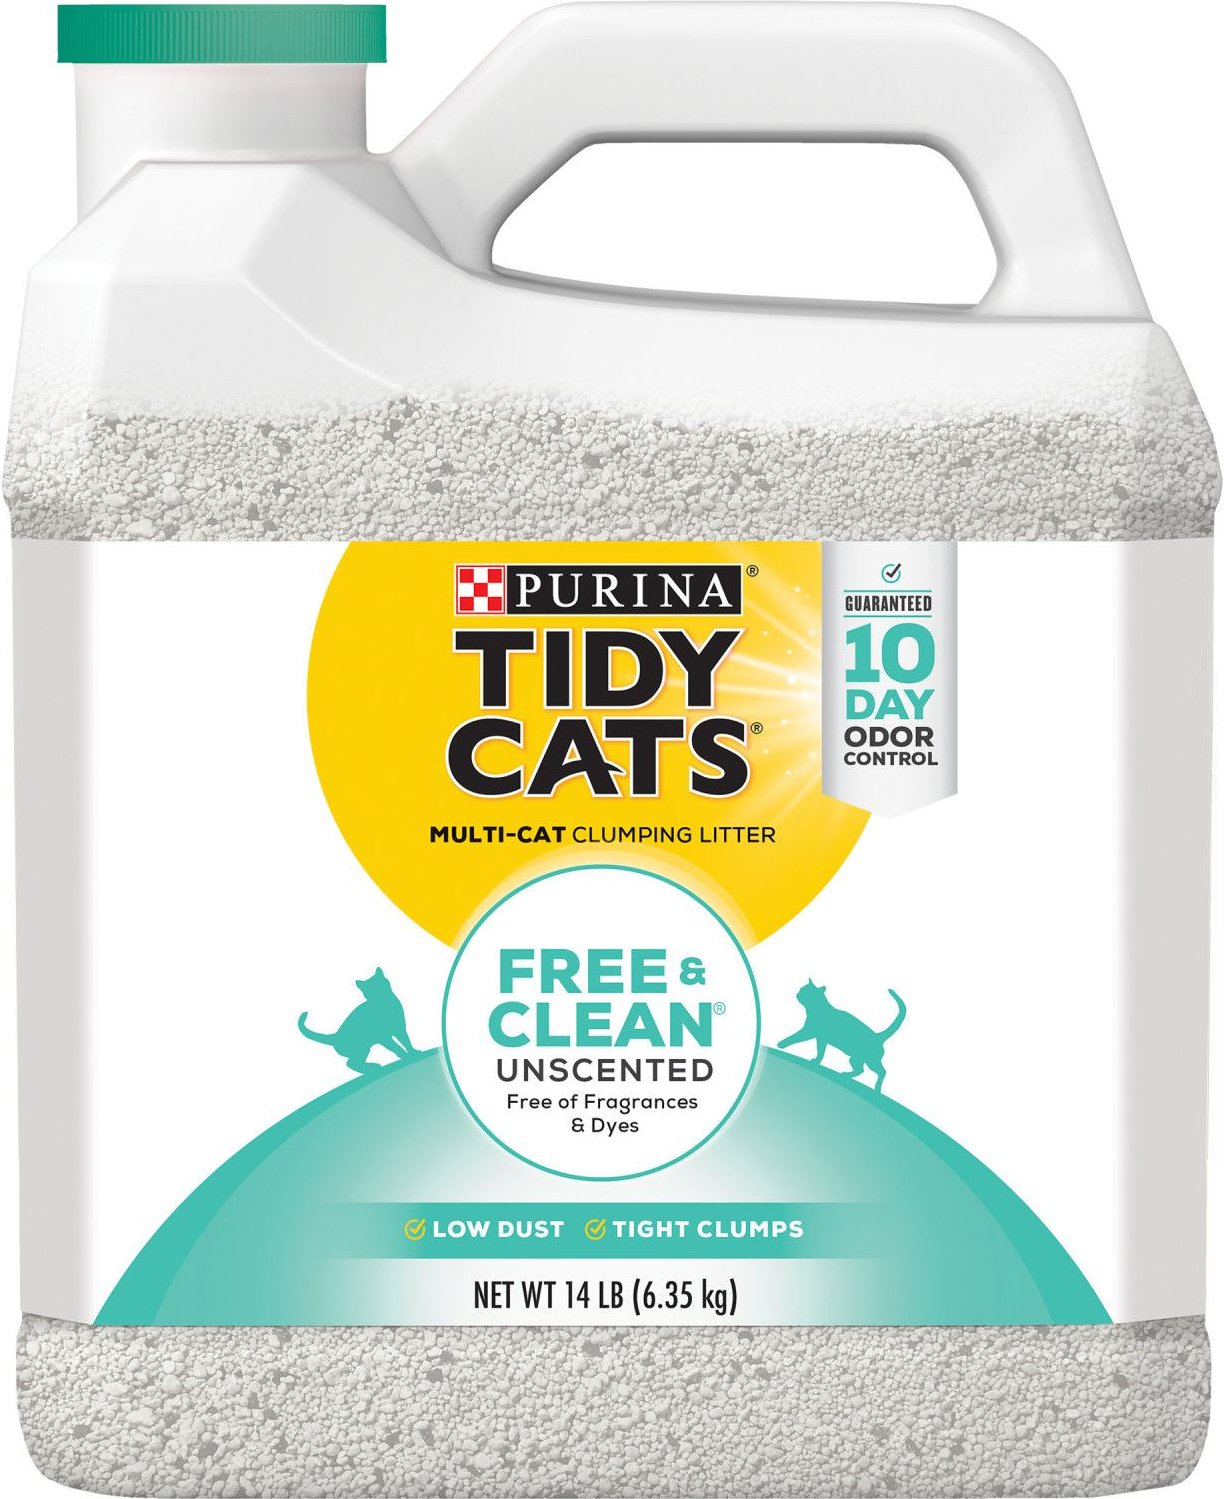 TIDY CATS Free \u0026 Clean Unscented 